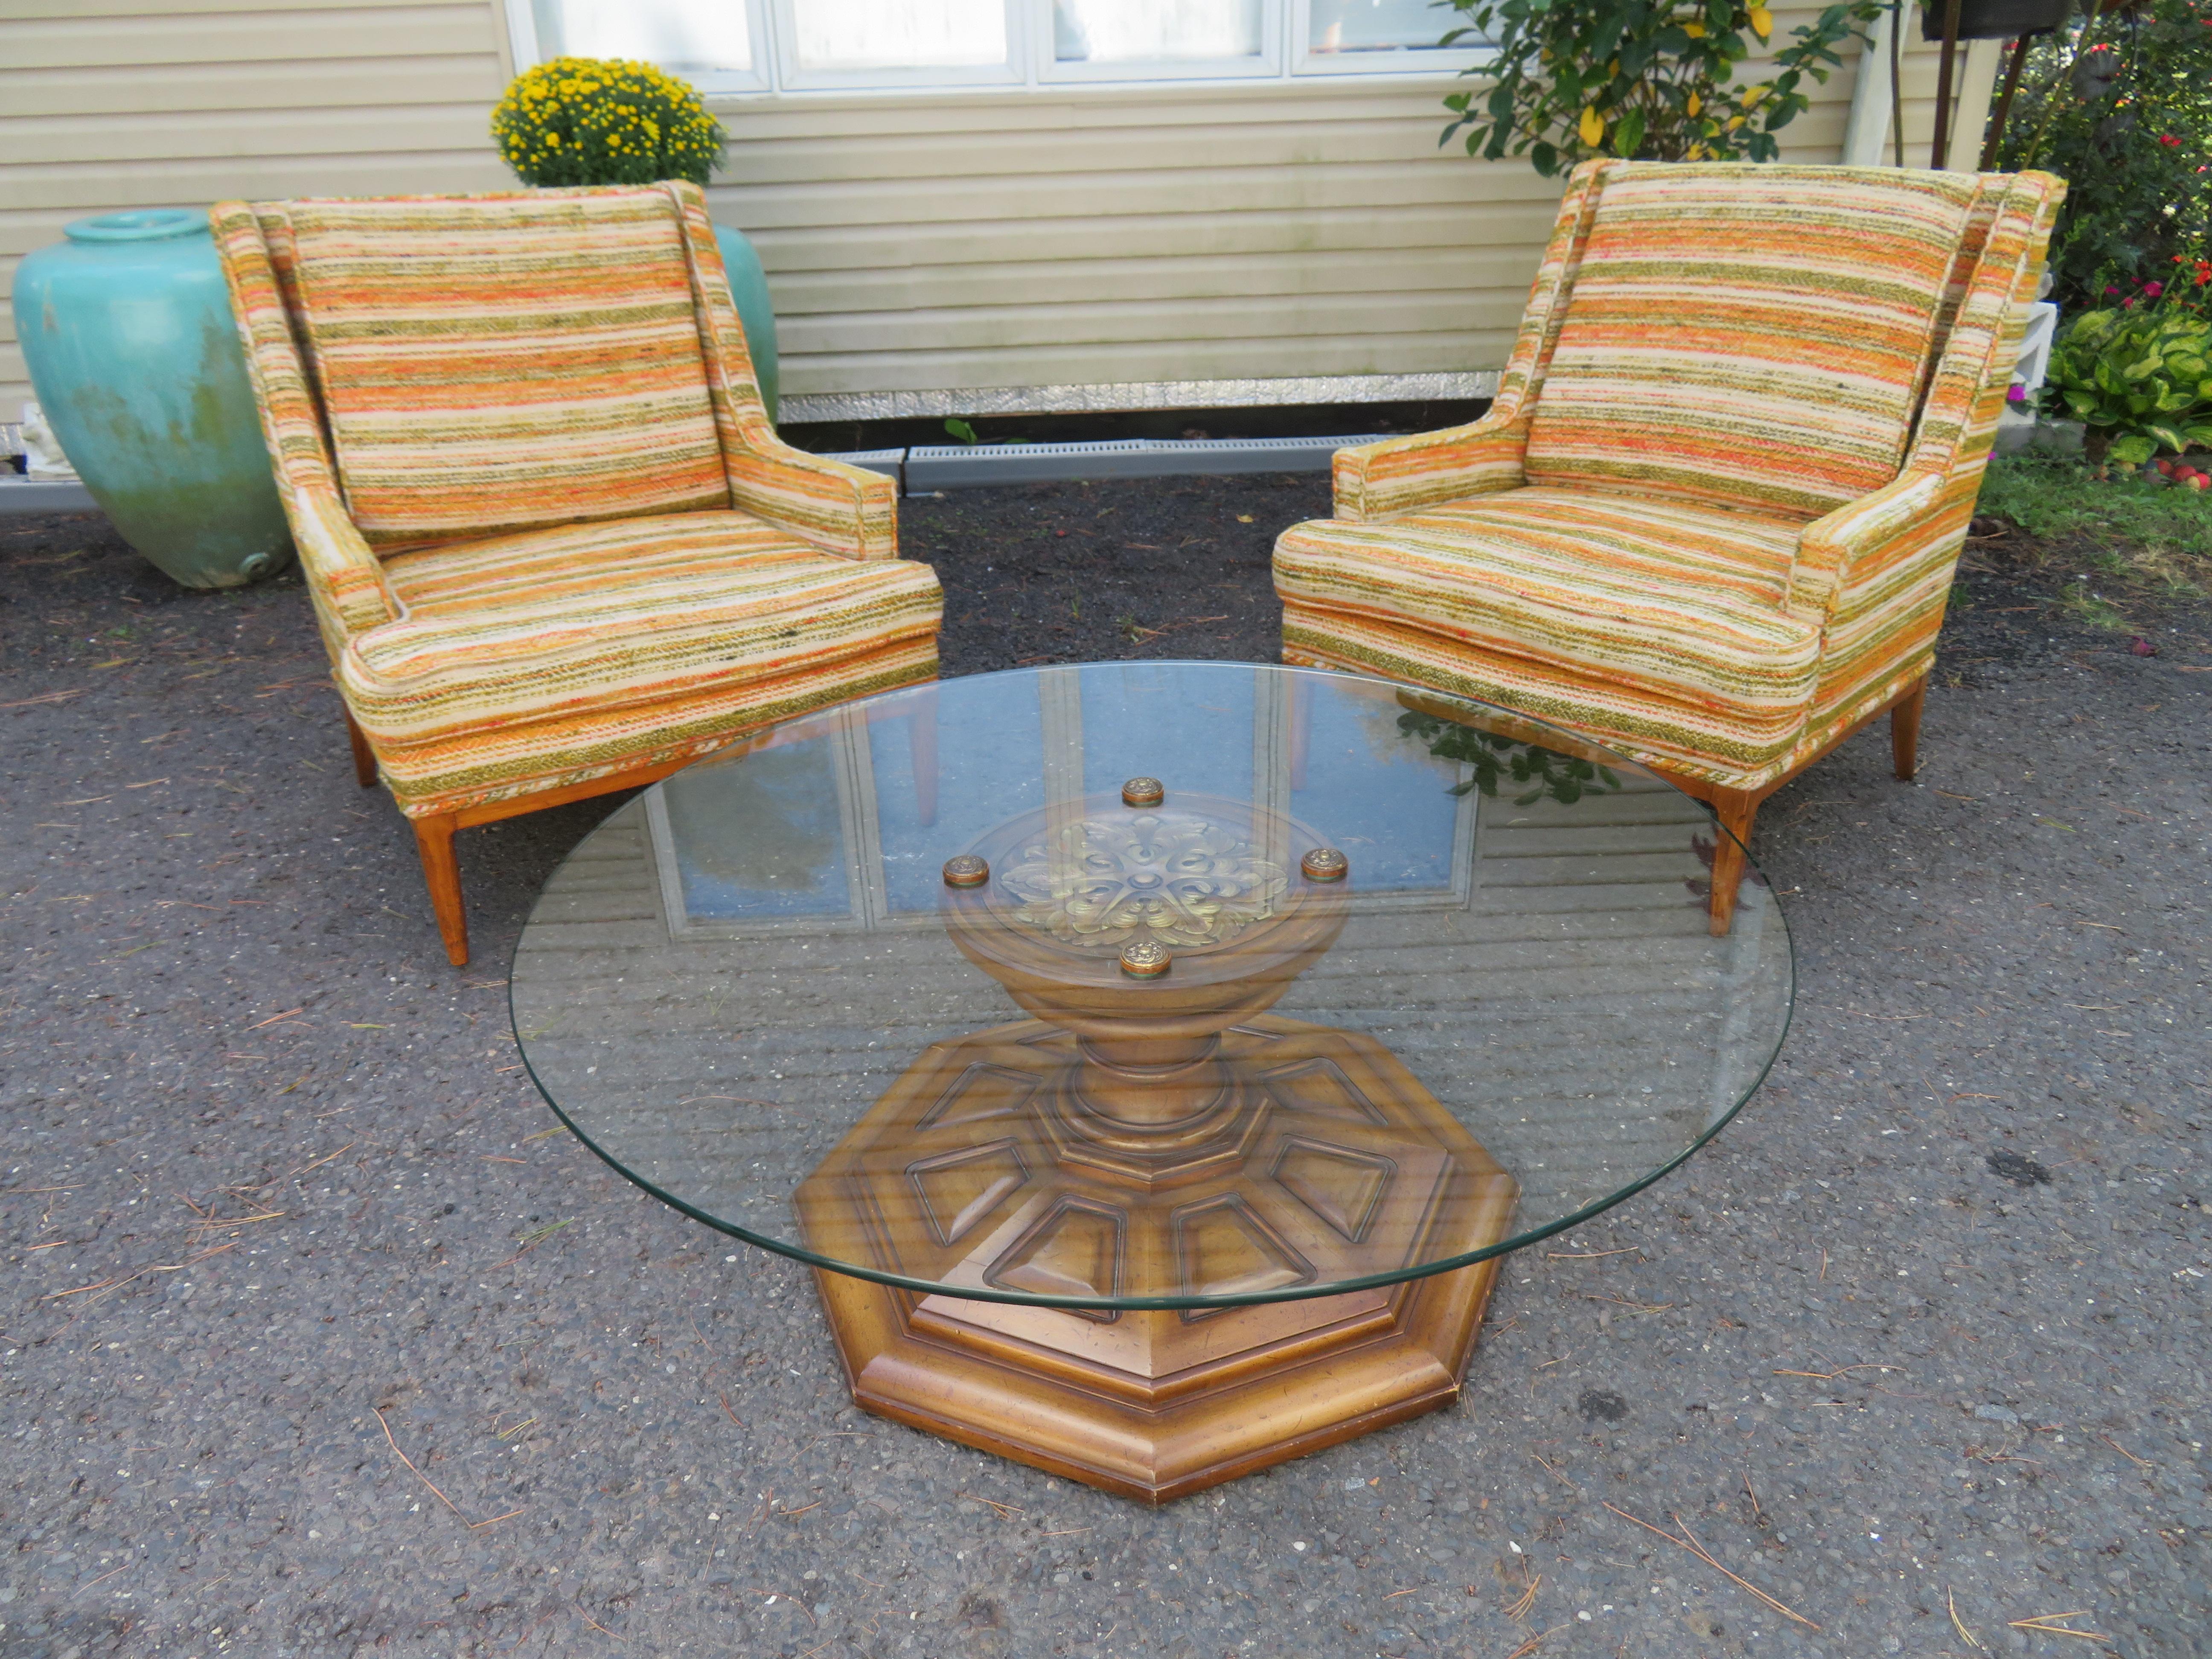 Stylish carved pedestal base coffee table by Weiman. We love the 4 round metalwork rondels of neoclassical motifs highlighting the glass top. The base has mitred pie formation carved panels, semi-gloss finishing, and faux distress painted technique